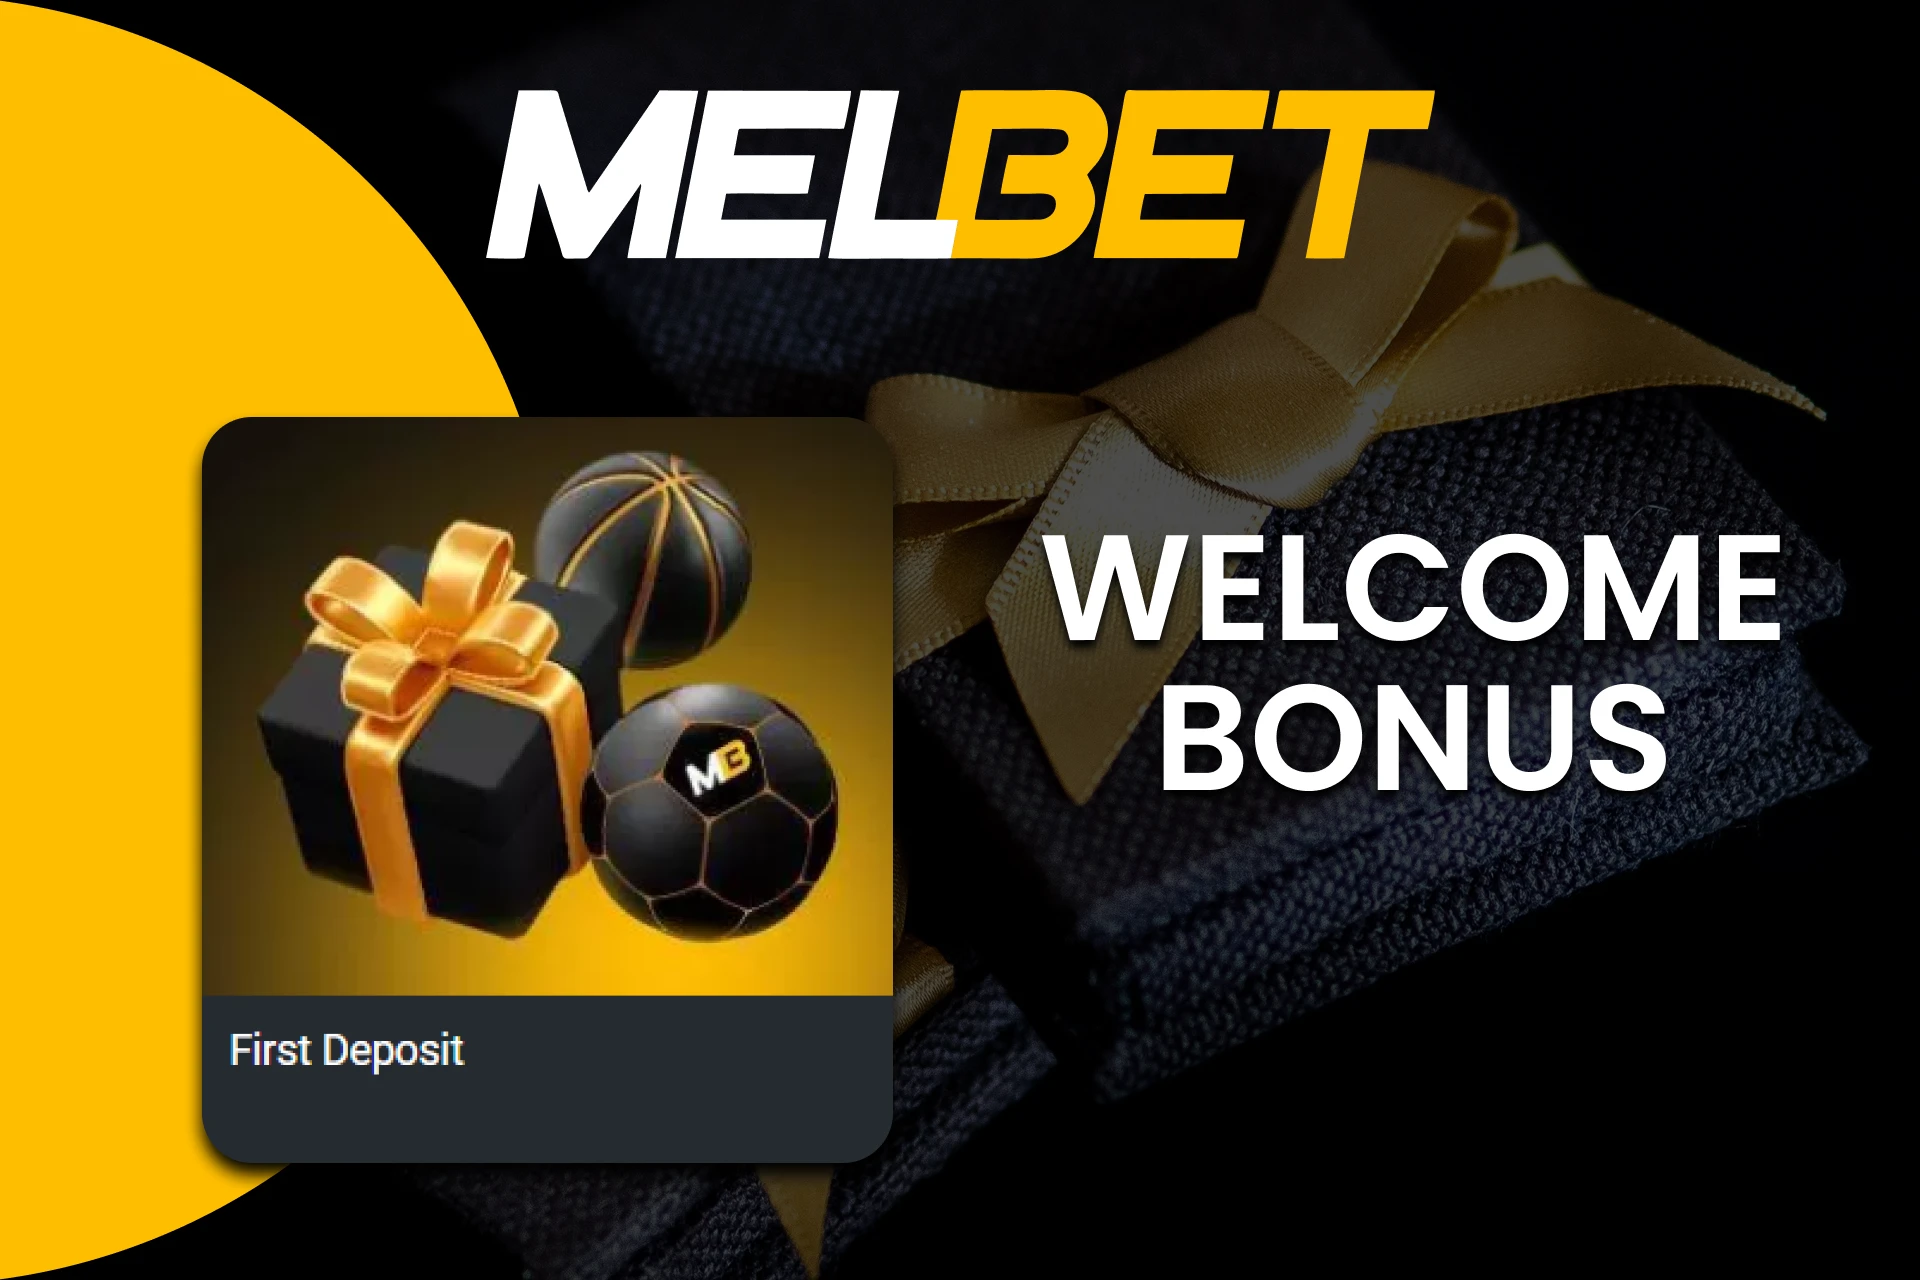 Melbet gives bonuses for betting on tennis.